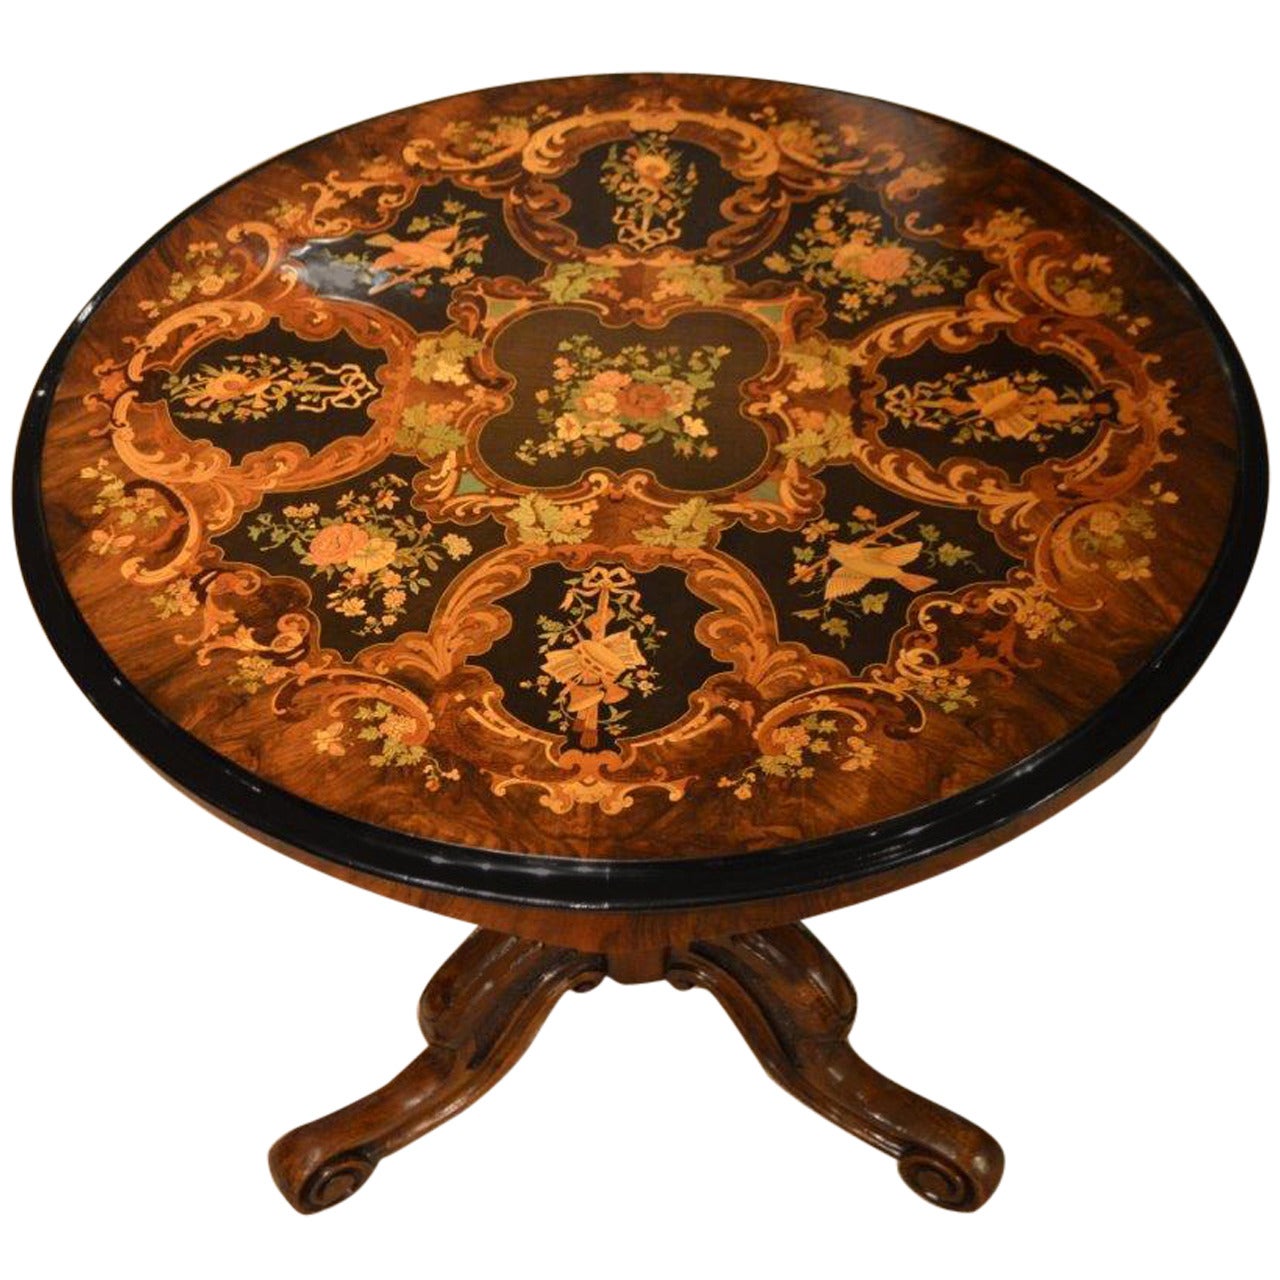 Quality Burr Walnut and Marquetry Inlaid Victorian Period Table